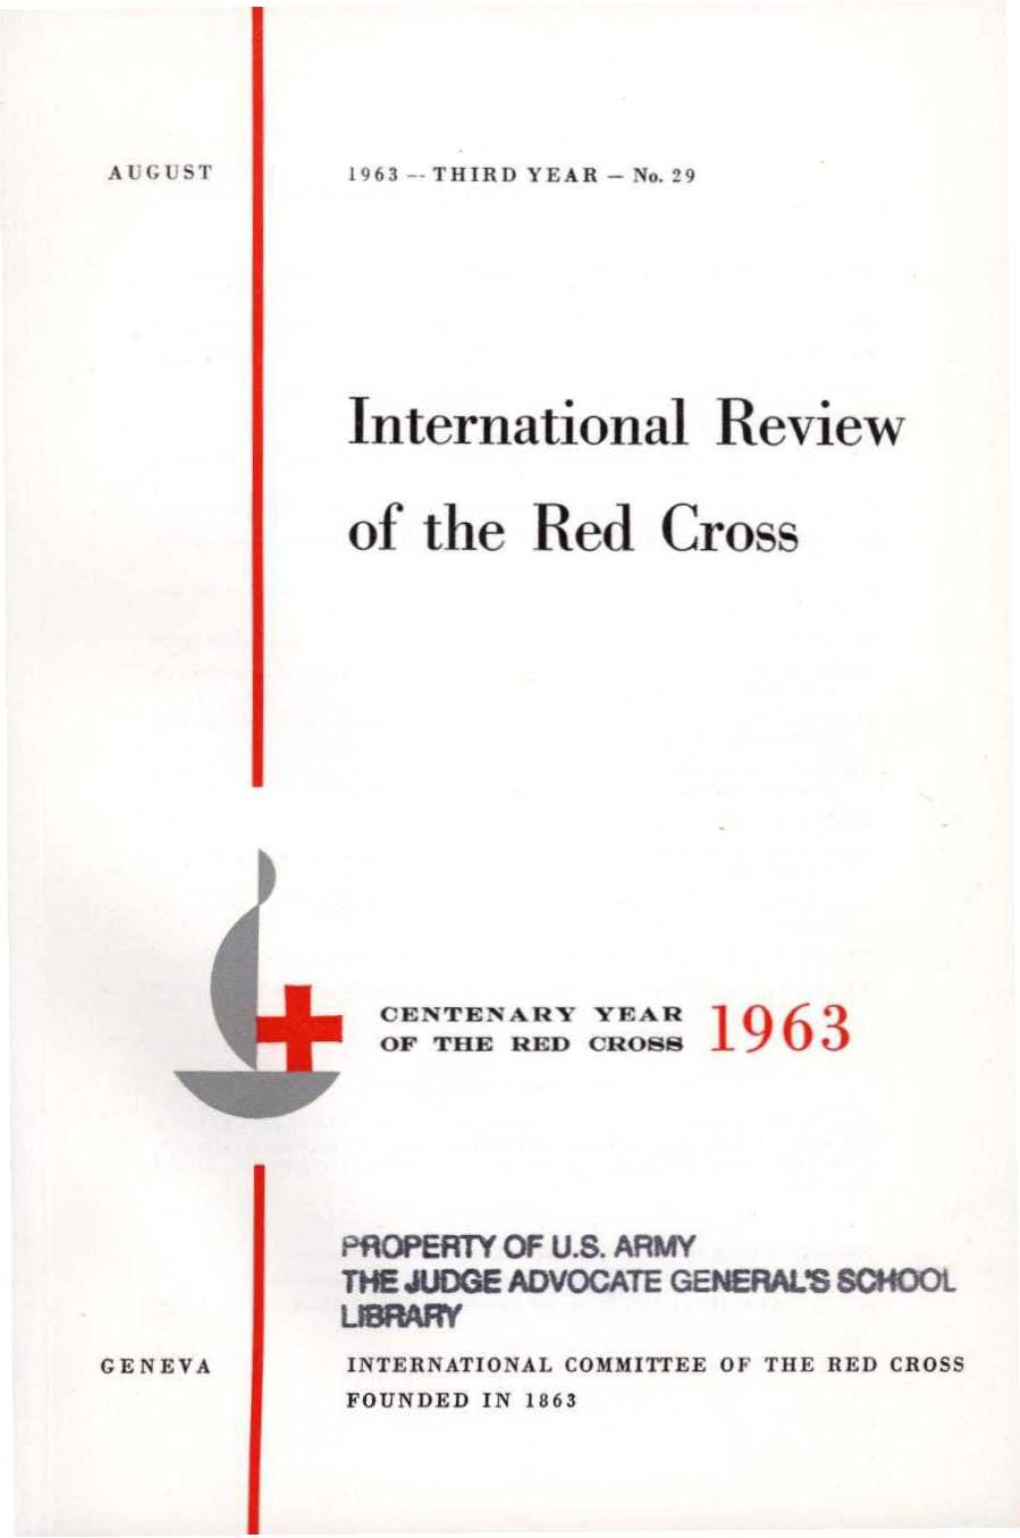 International Review of the Red Cross, August 1963, Third Year